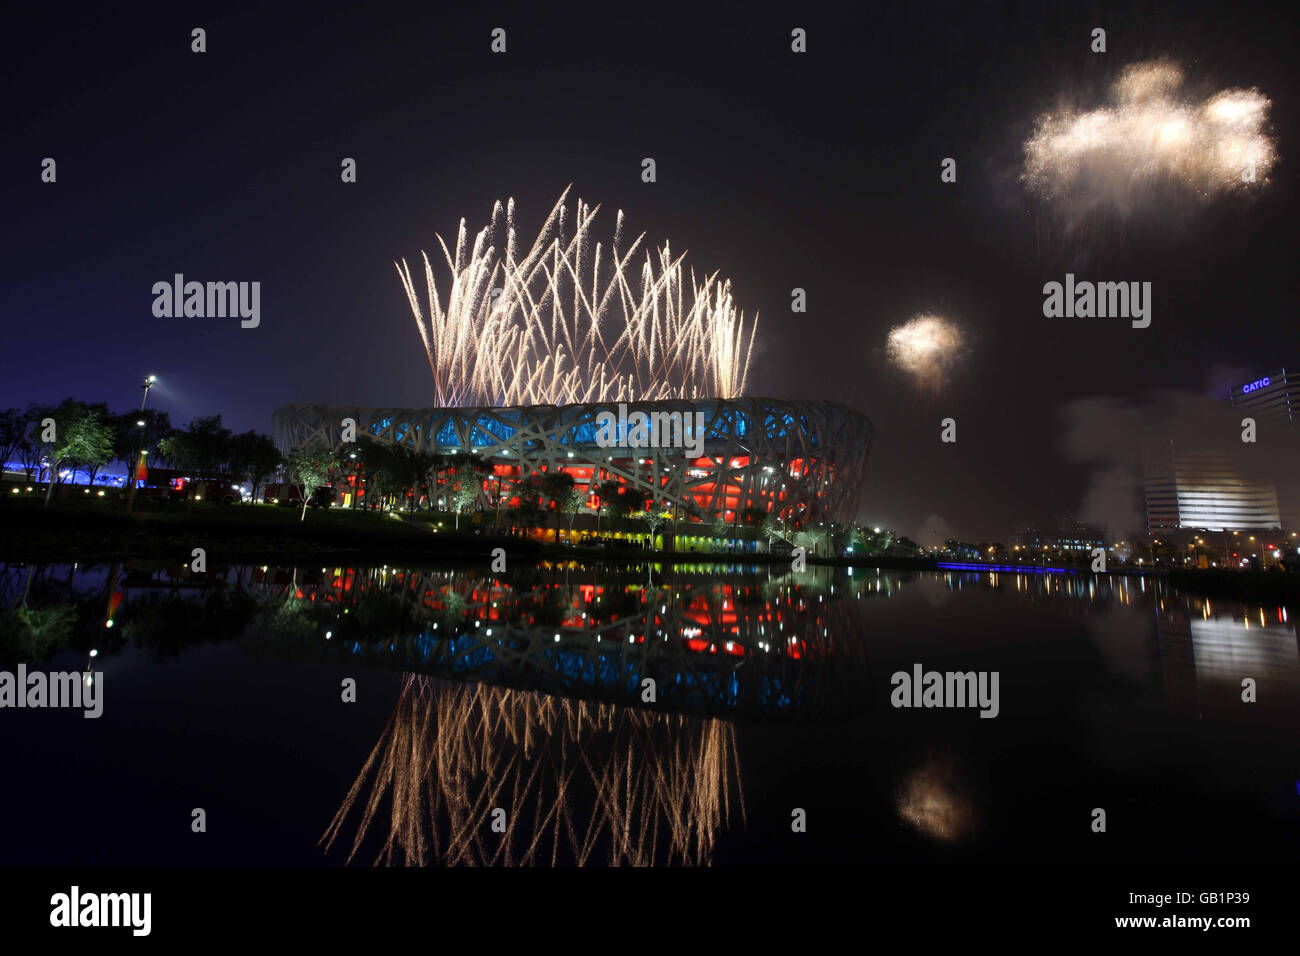 A view of the Beijing Olympic Games 2008 Opening Ceremony at the National Stadium in Beijing, China. Stock Photo